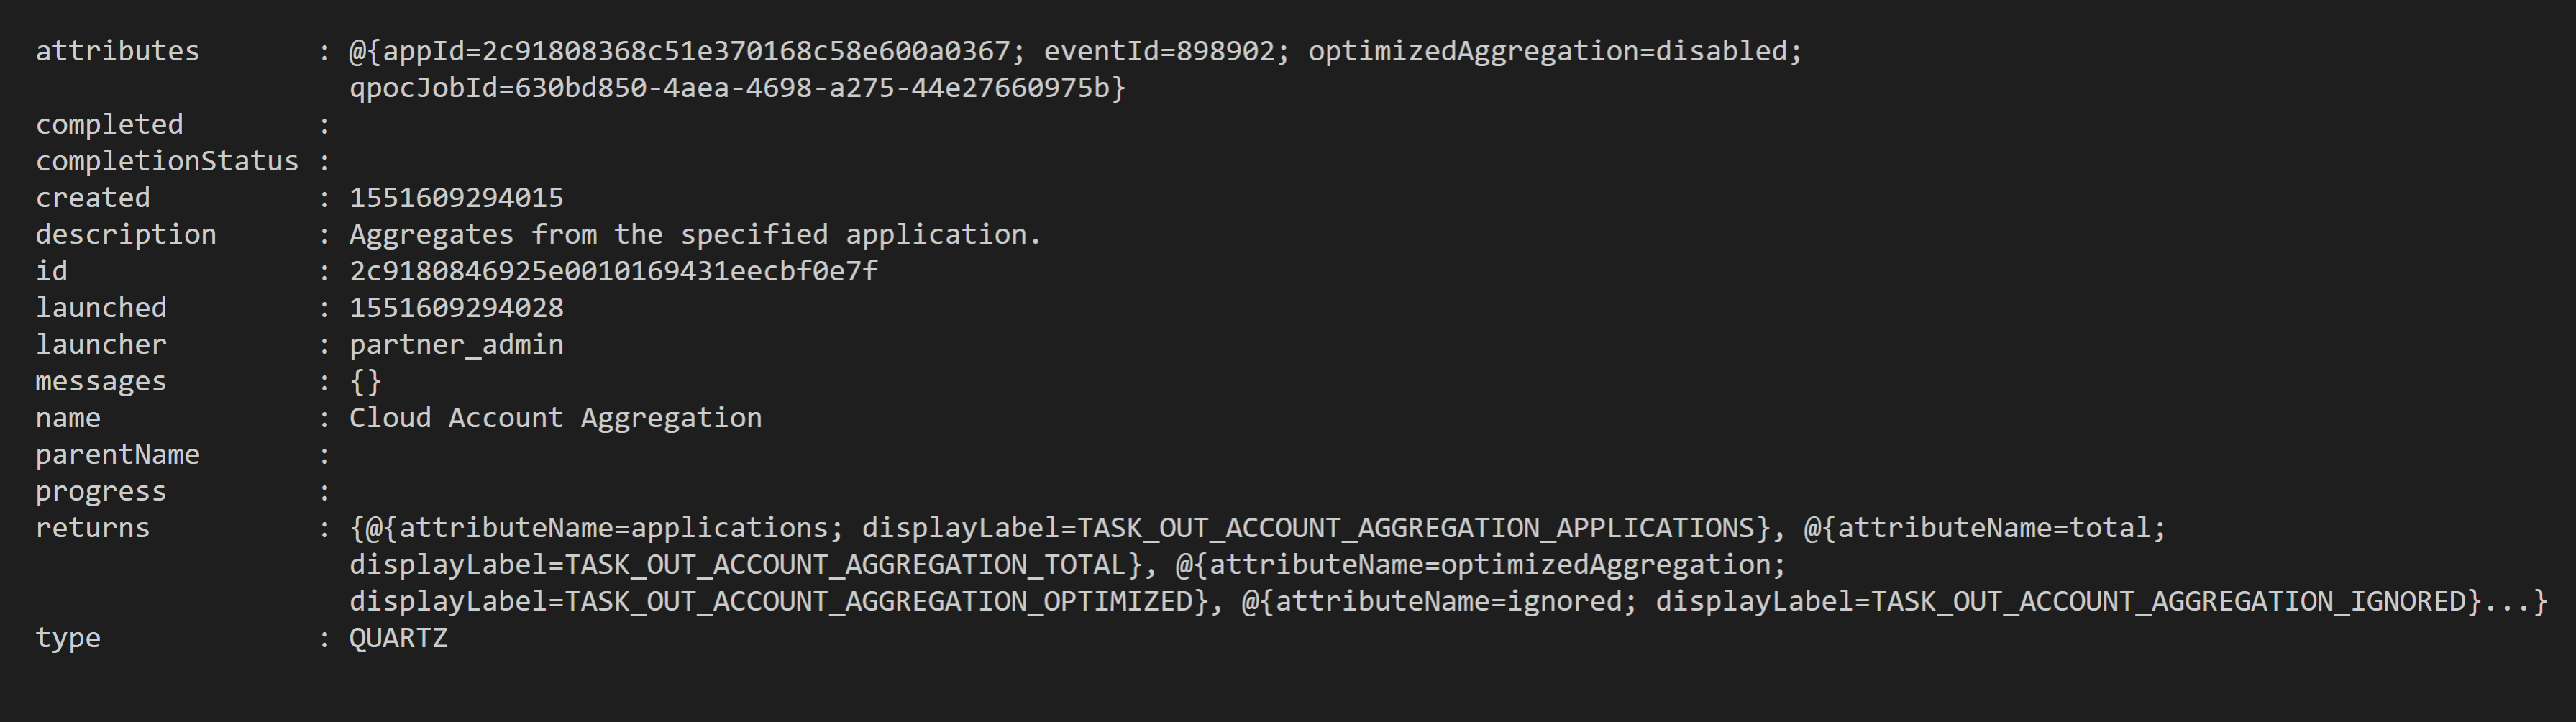 Returned Object when initiating IdentityNow Aggregation via API with optimisation disabled.PNG